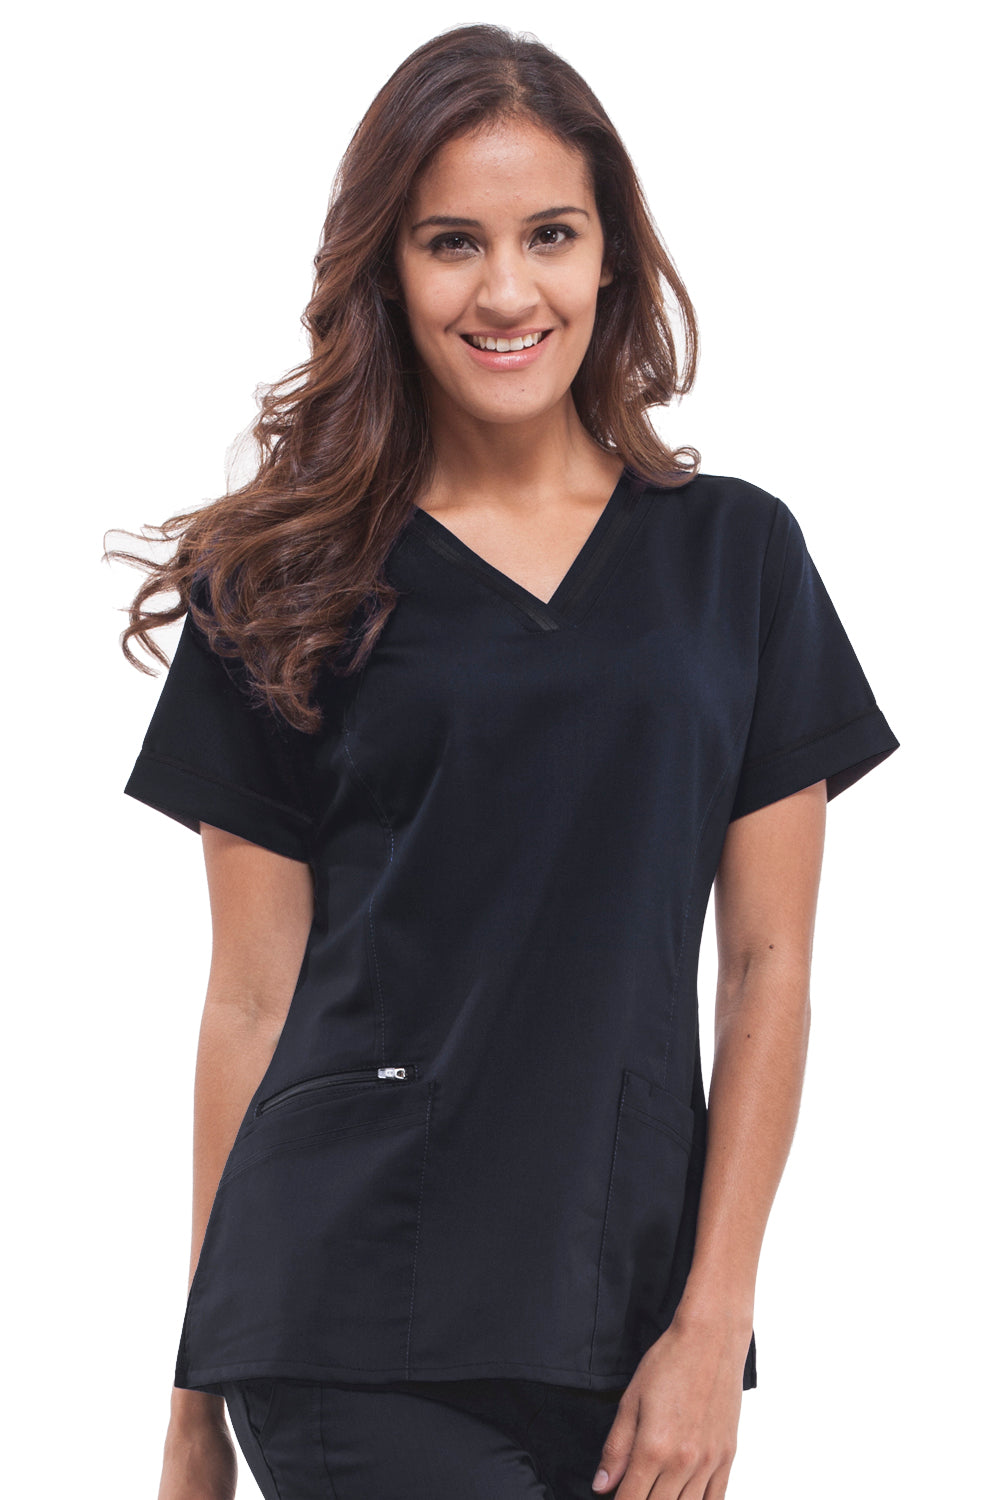 Healing Hands Scrub Top Purple Label Jasmin in Black at Parker's Clothing and Shoes.